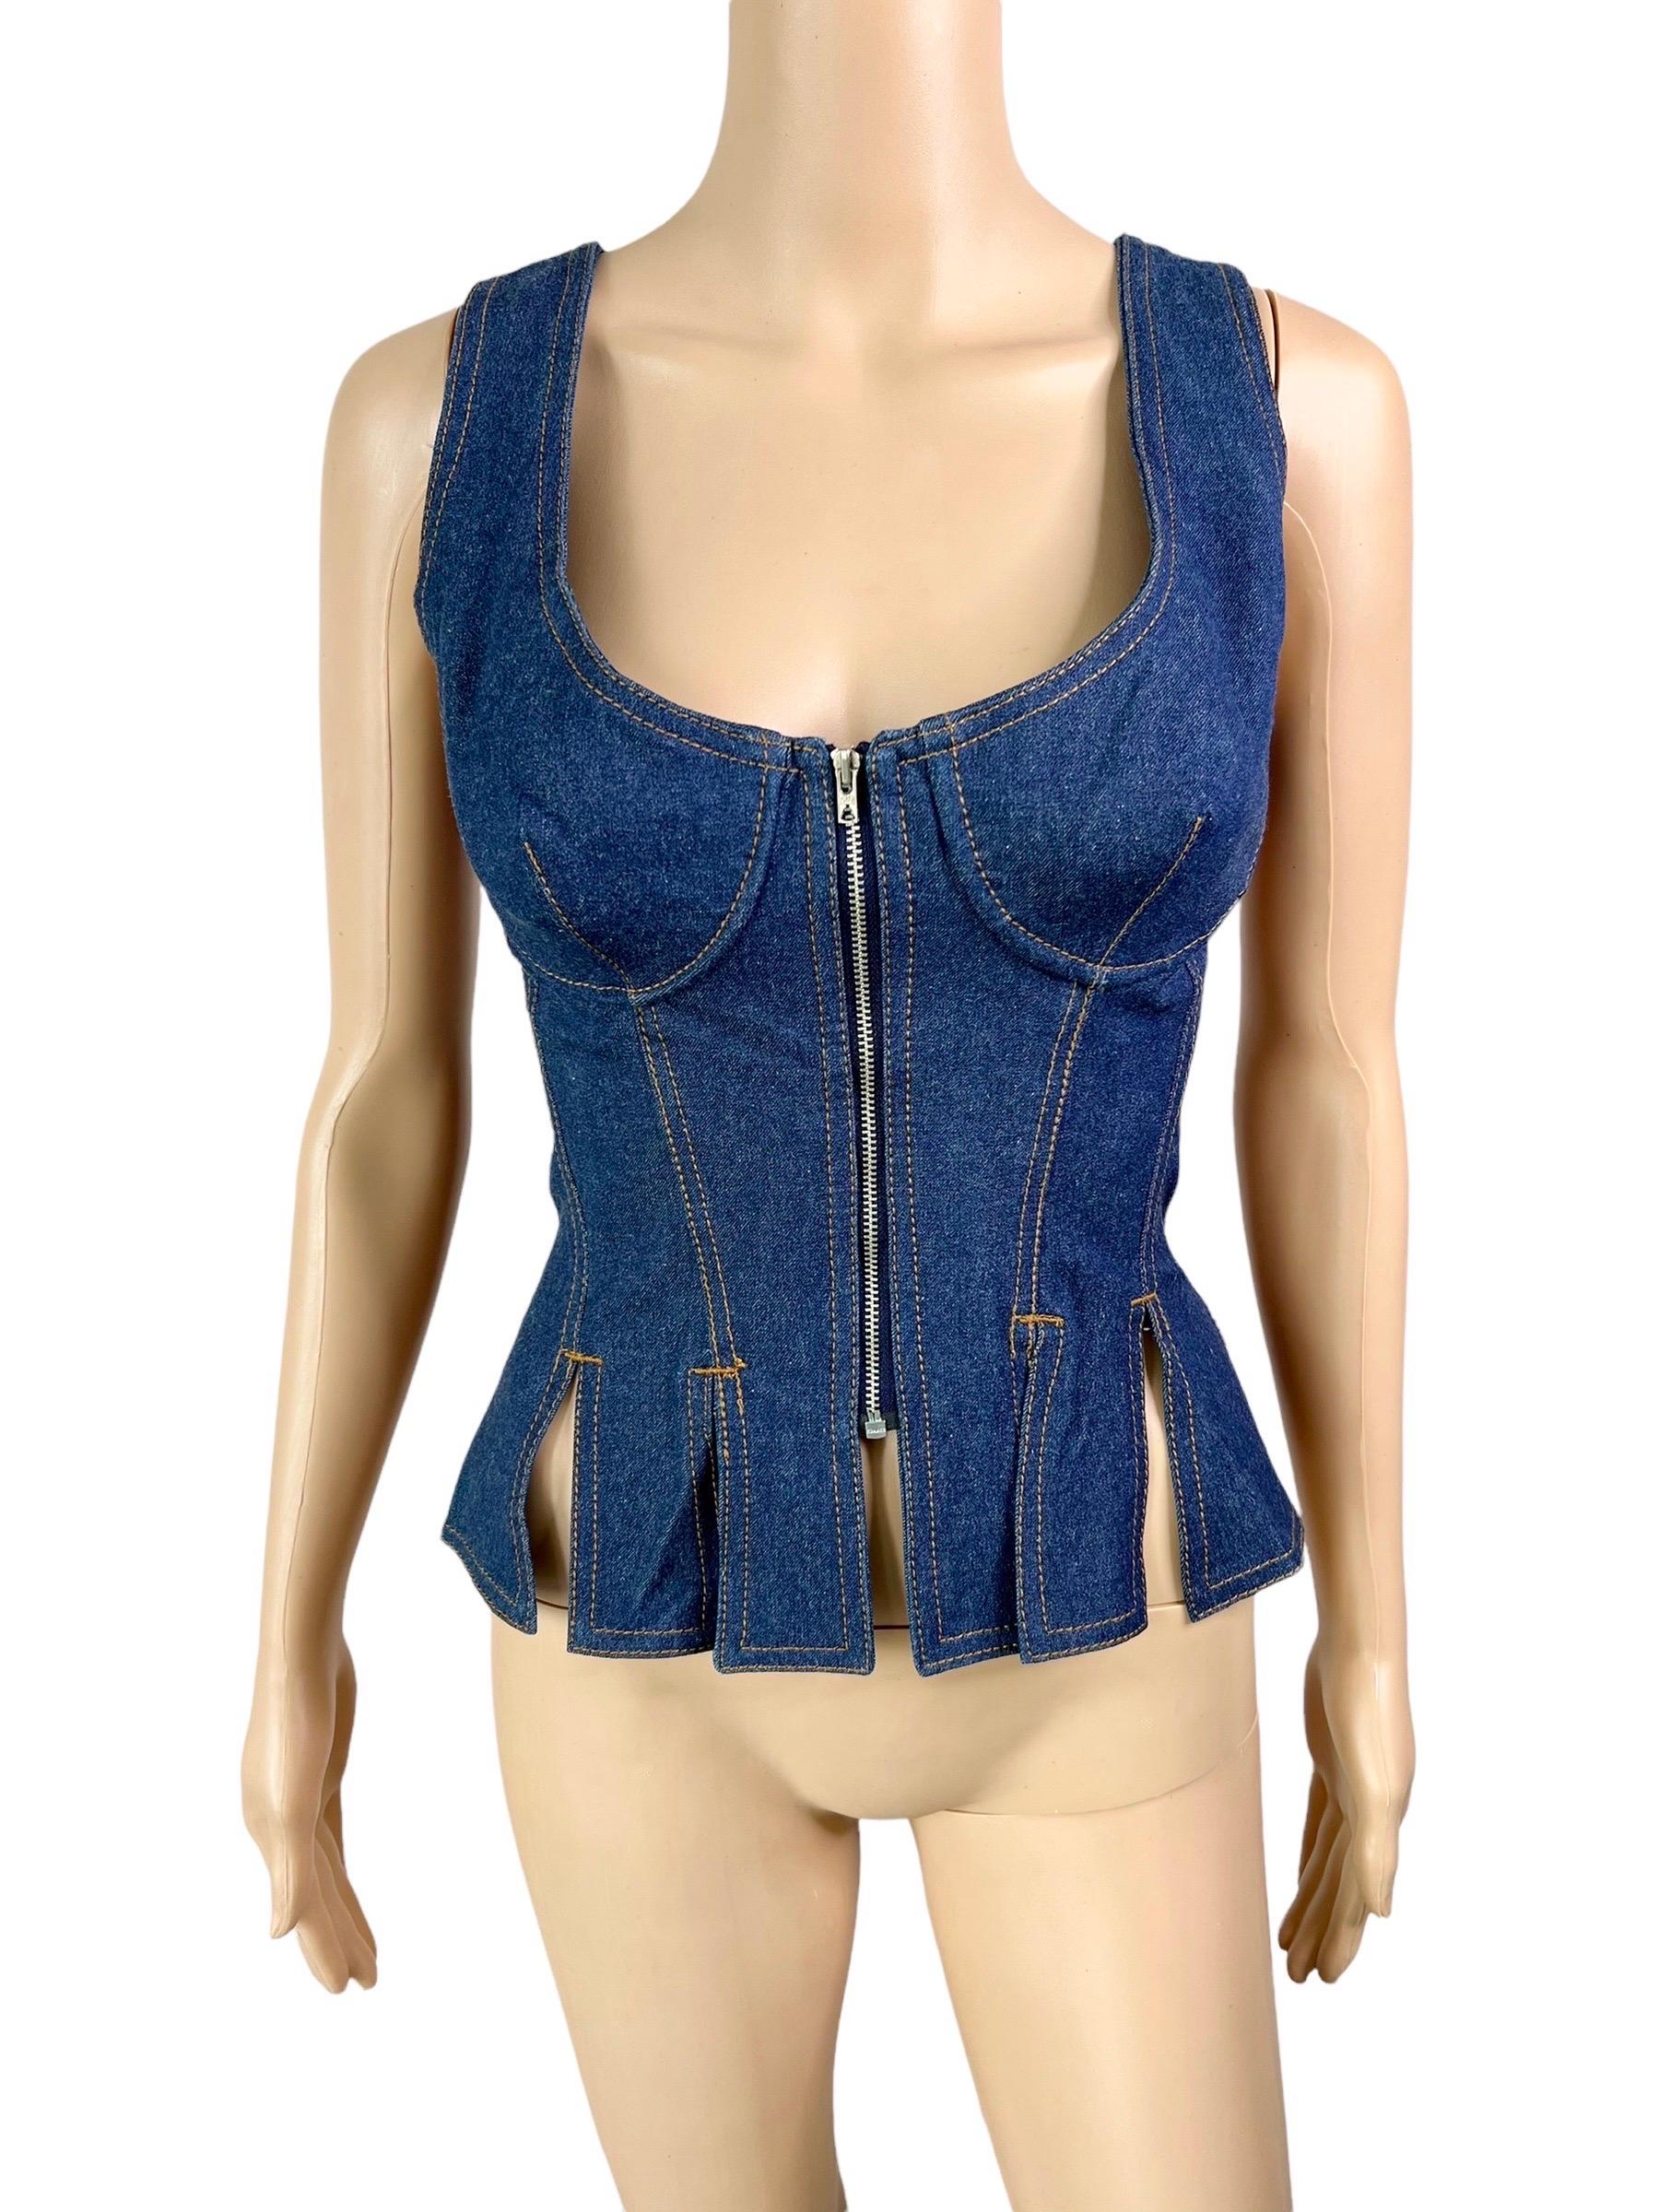 Jean Paul Gaultier Vintage Denim Bra Bustier Corset Lace Up Zipper Top S/M

Please note size tag has been removed.